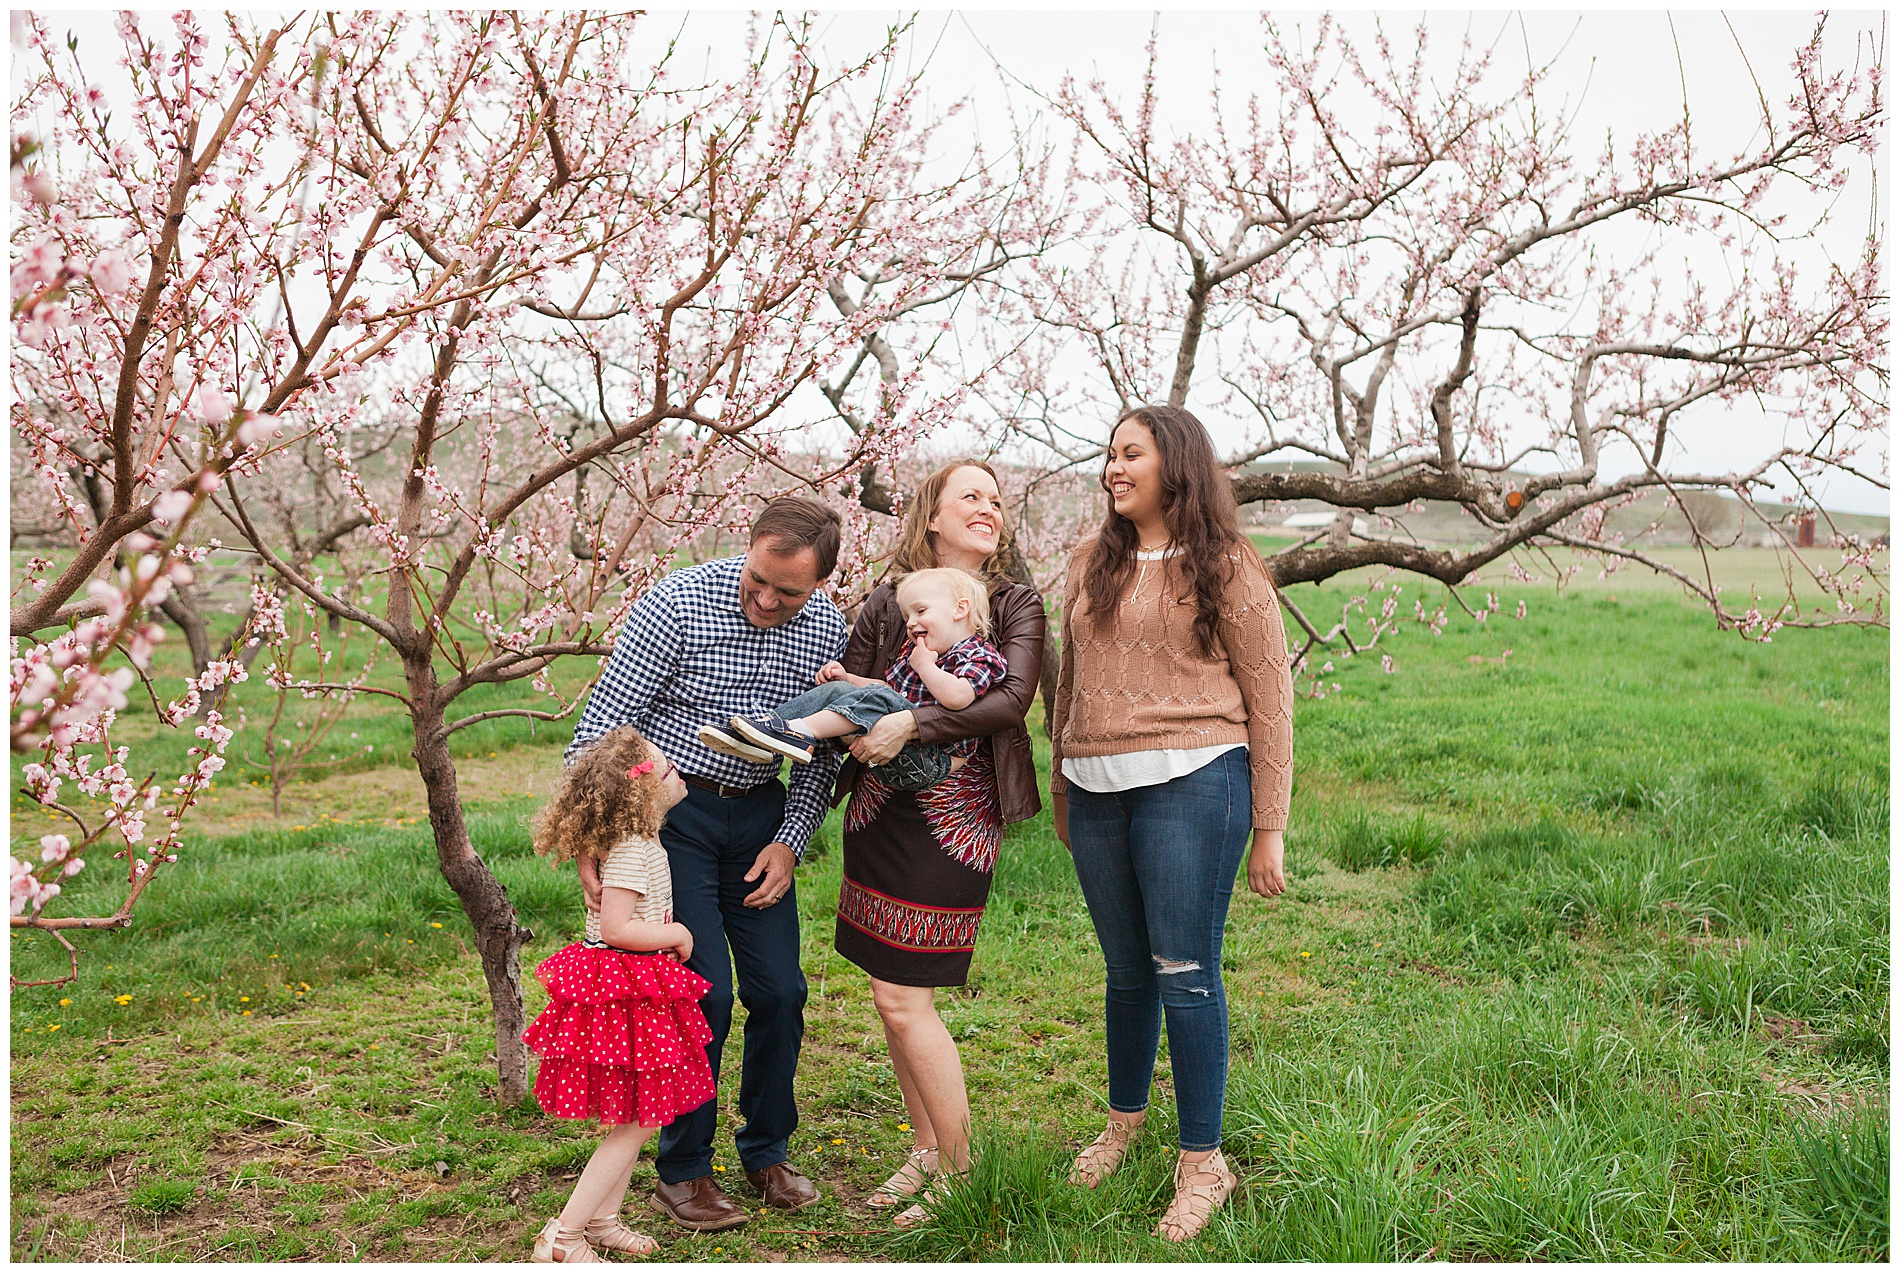 Fun and relaxed family portraits in a peach orchard with pink blossoms | Idaho family photographer | Robin Wheeler Photography